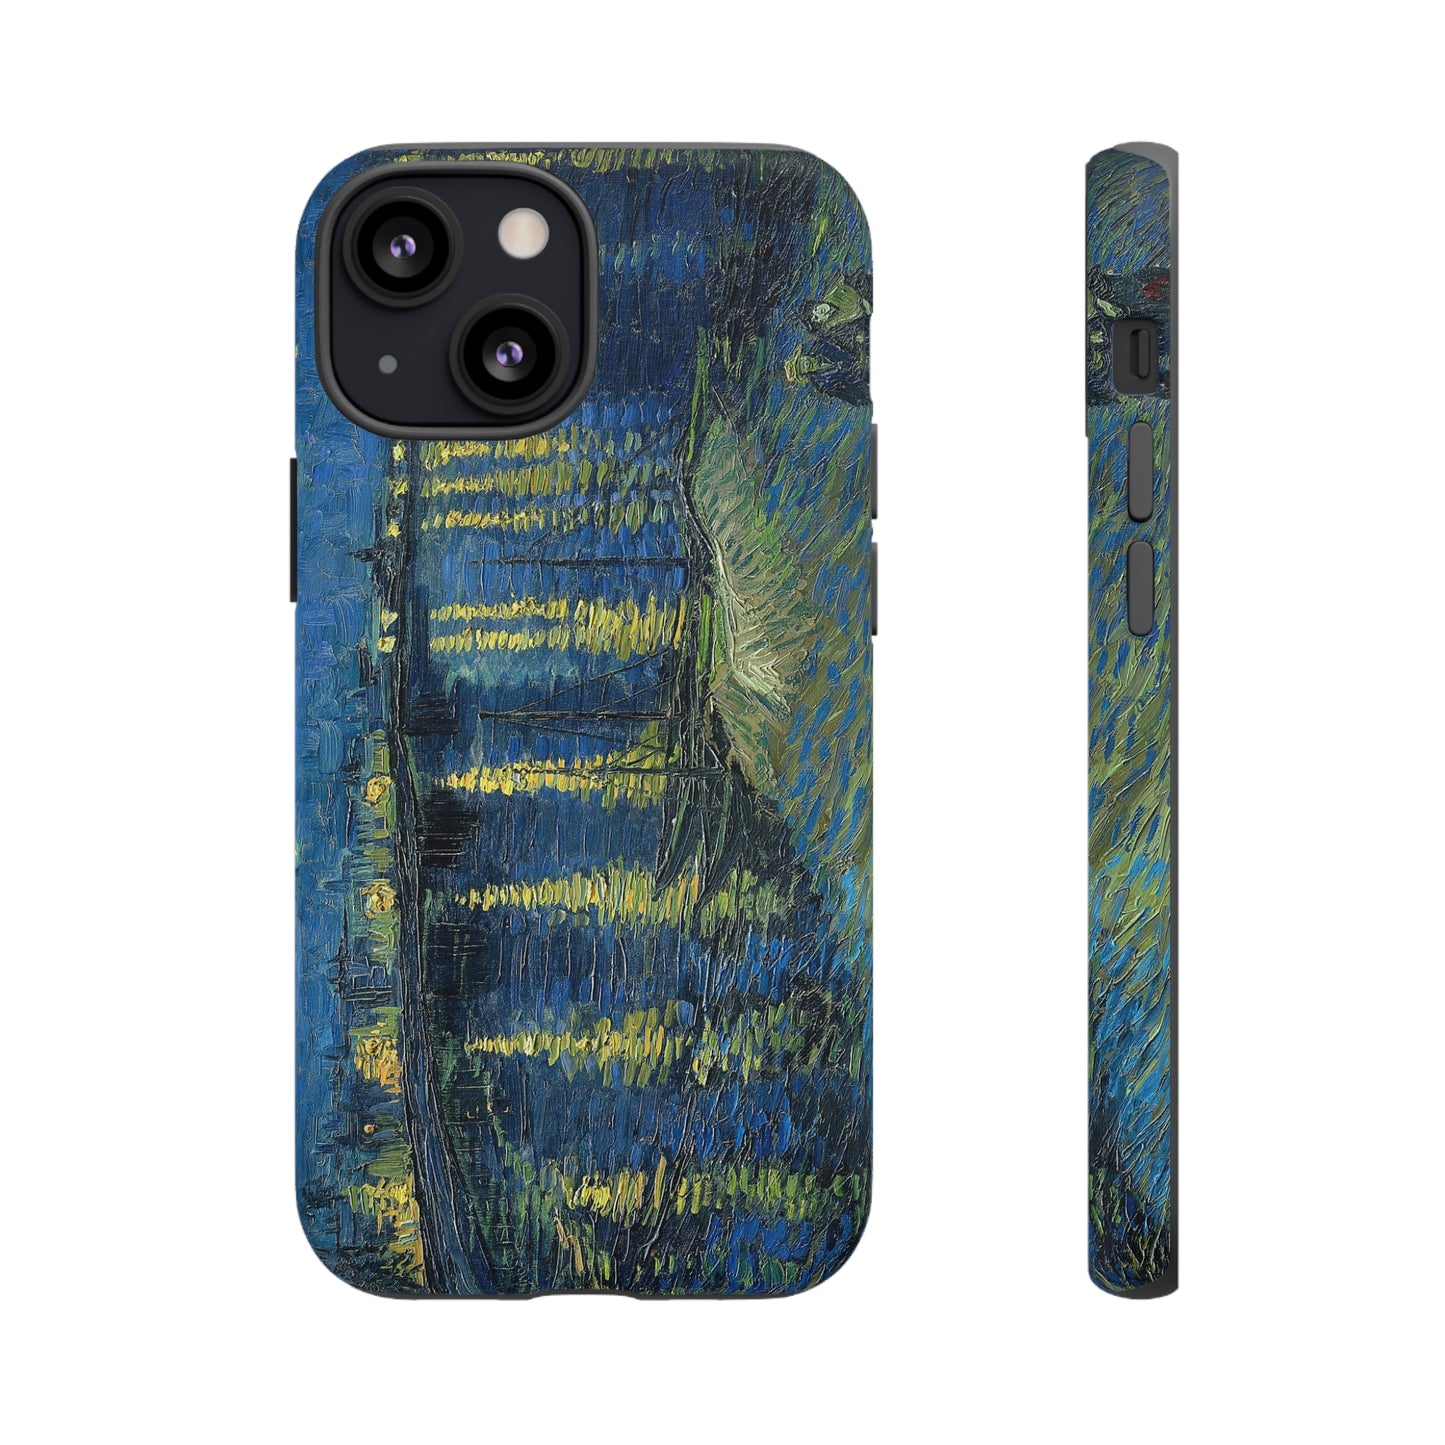 Starry Night over the Rhone by Vincent Van Gogh - Cell Phone Case